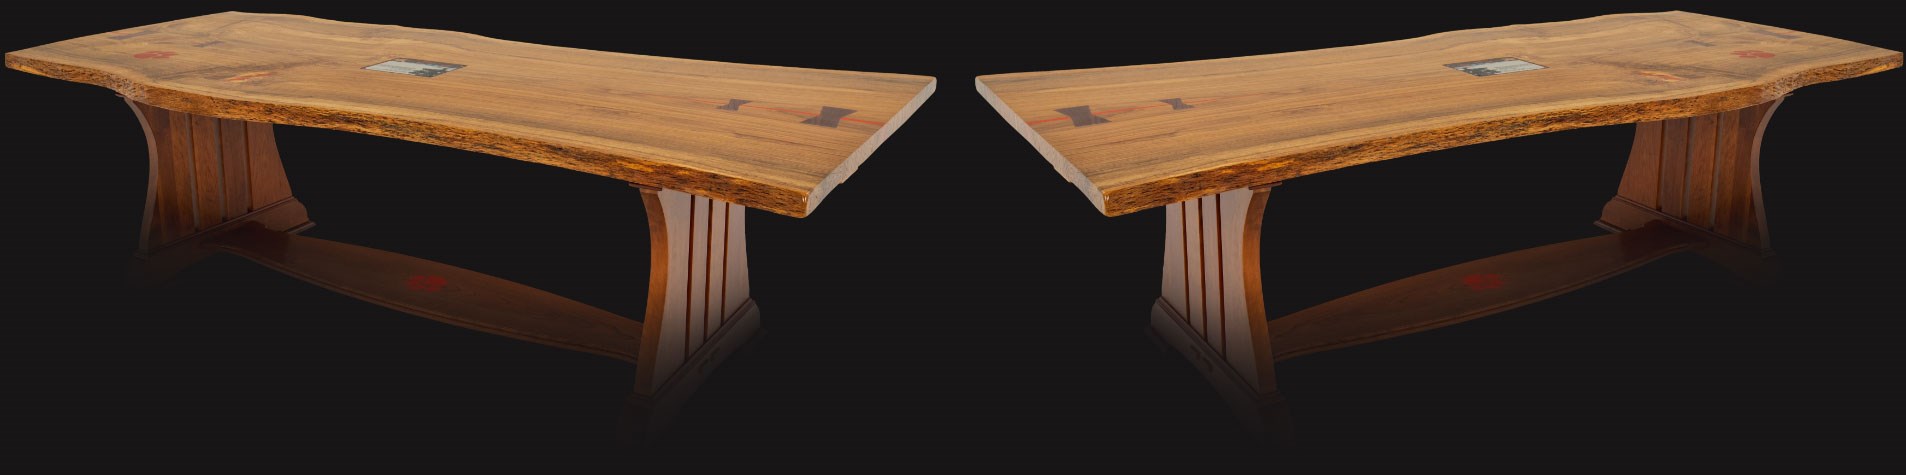 Two parts of the table placed side-by-side